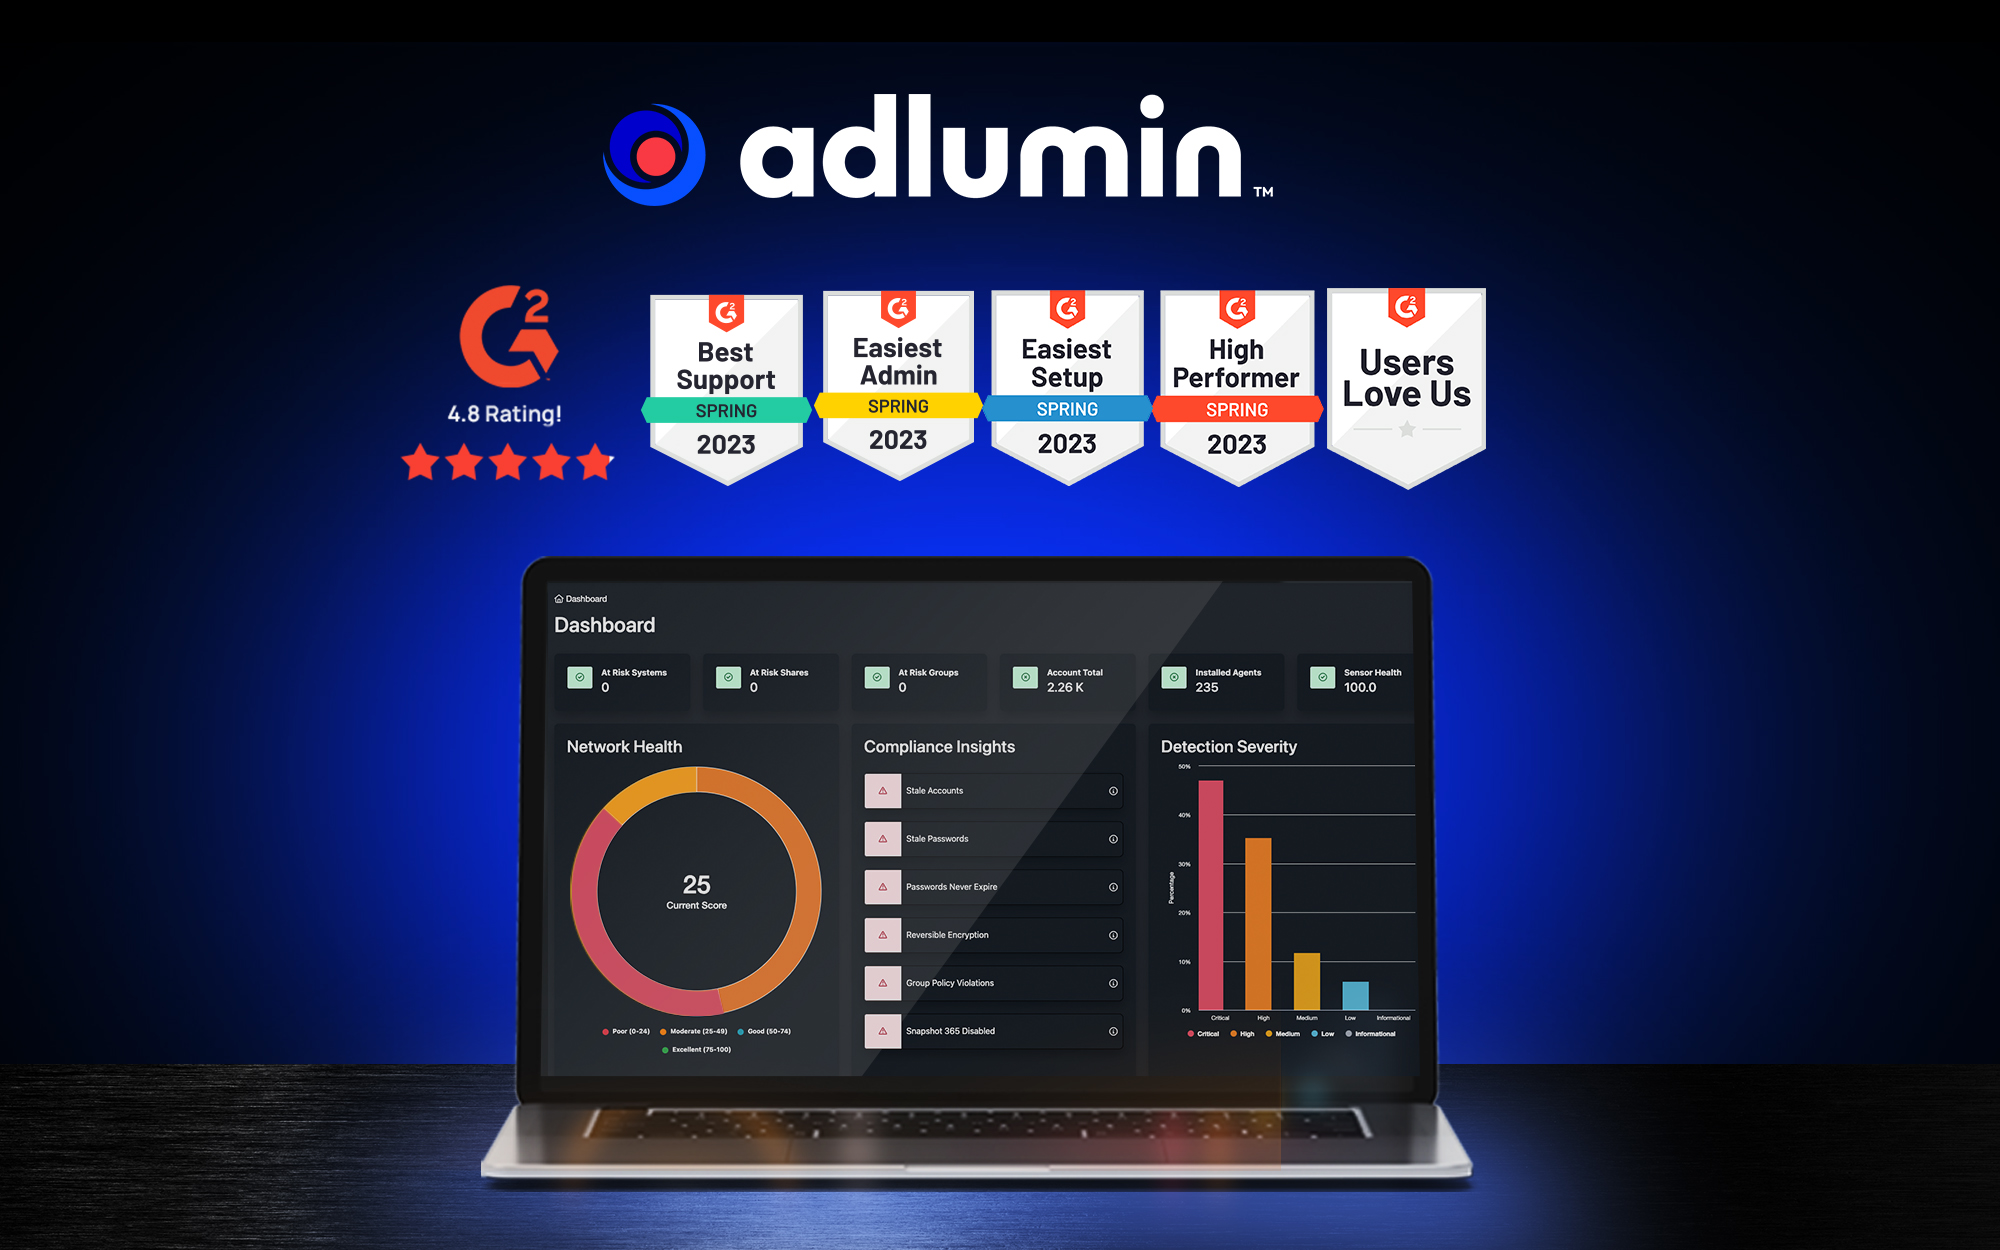 adlumin featured image sponsored content may 2023